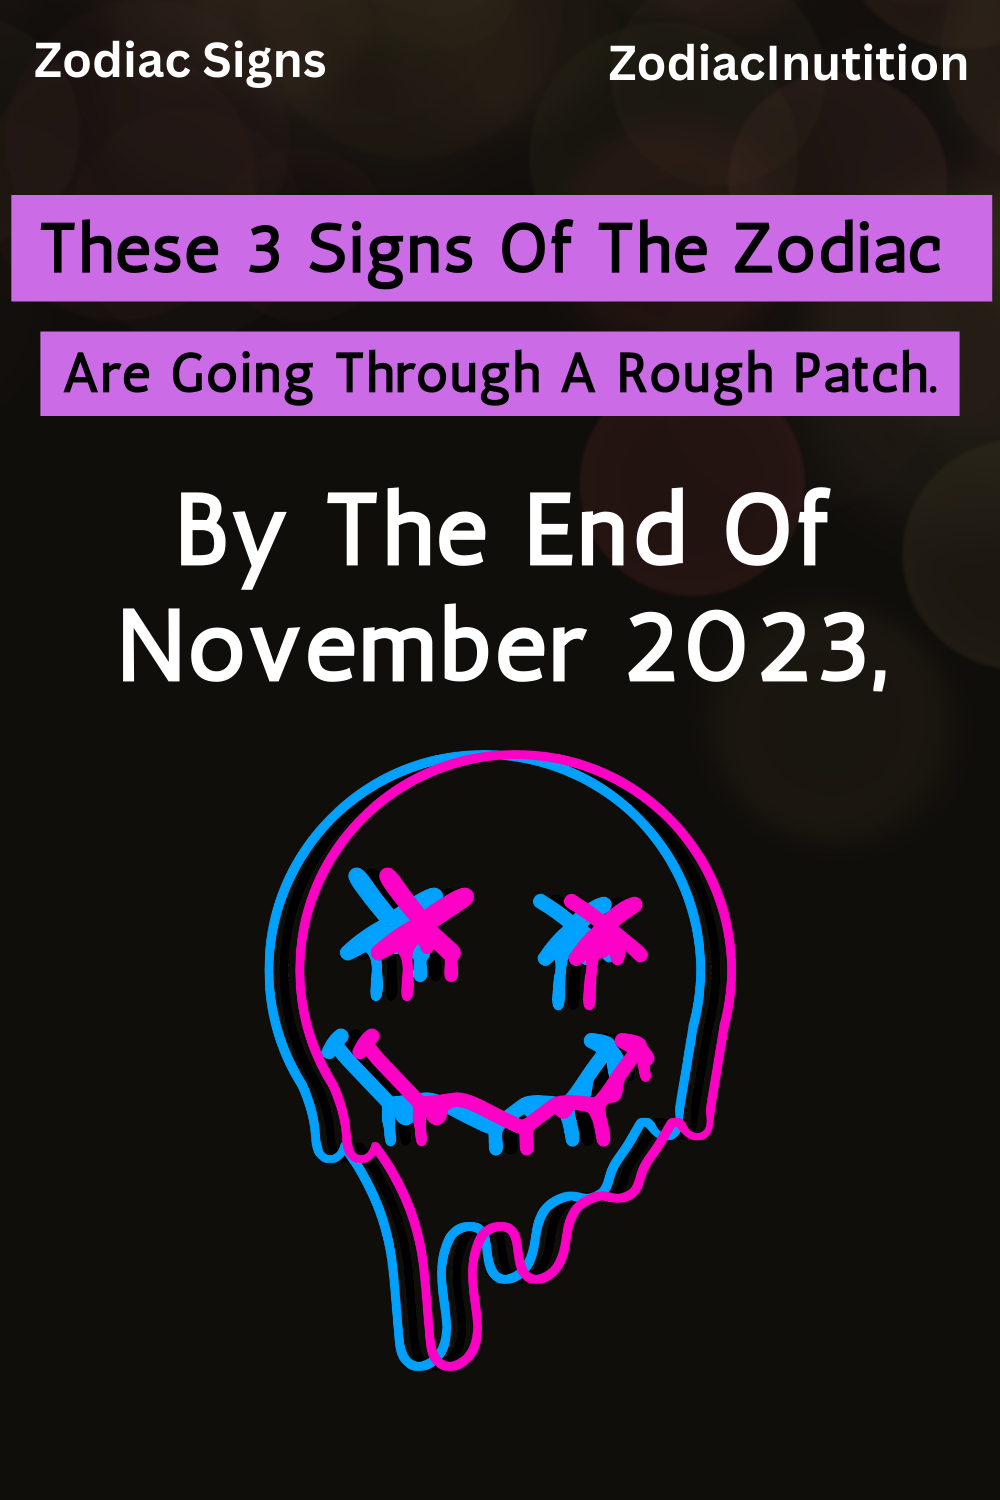 By The End Of November 2023, These 3 Signs Of The Zodiac Are Going Through A Rough Patch.